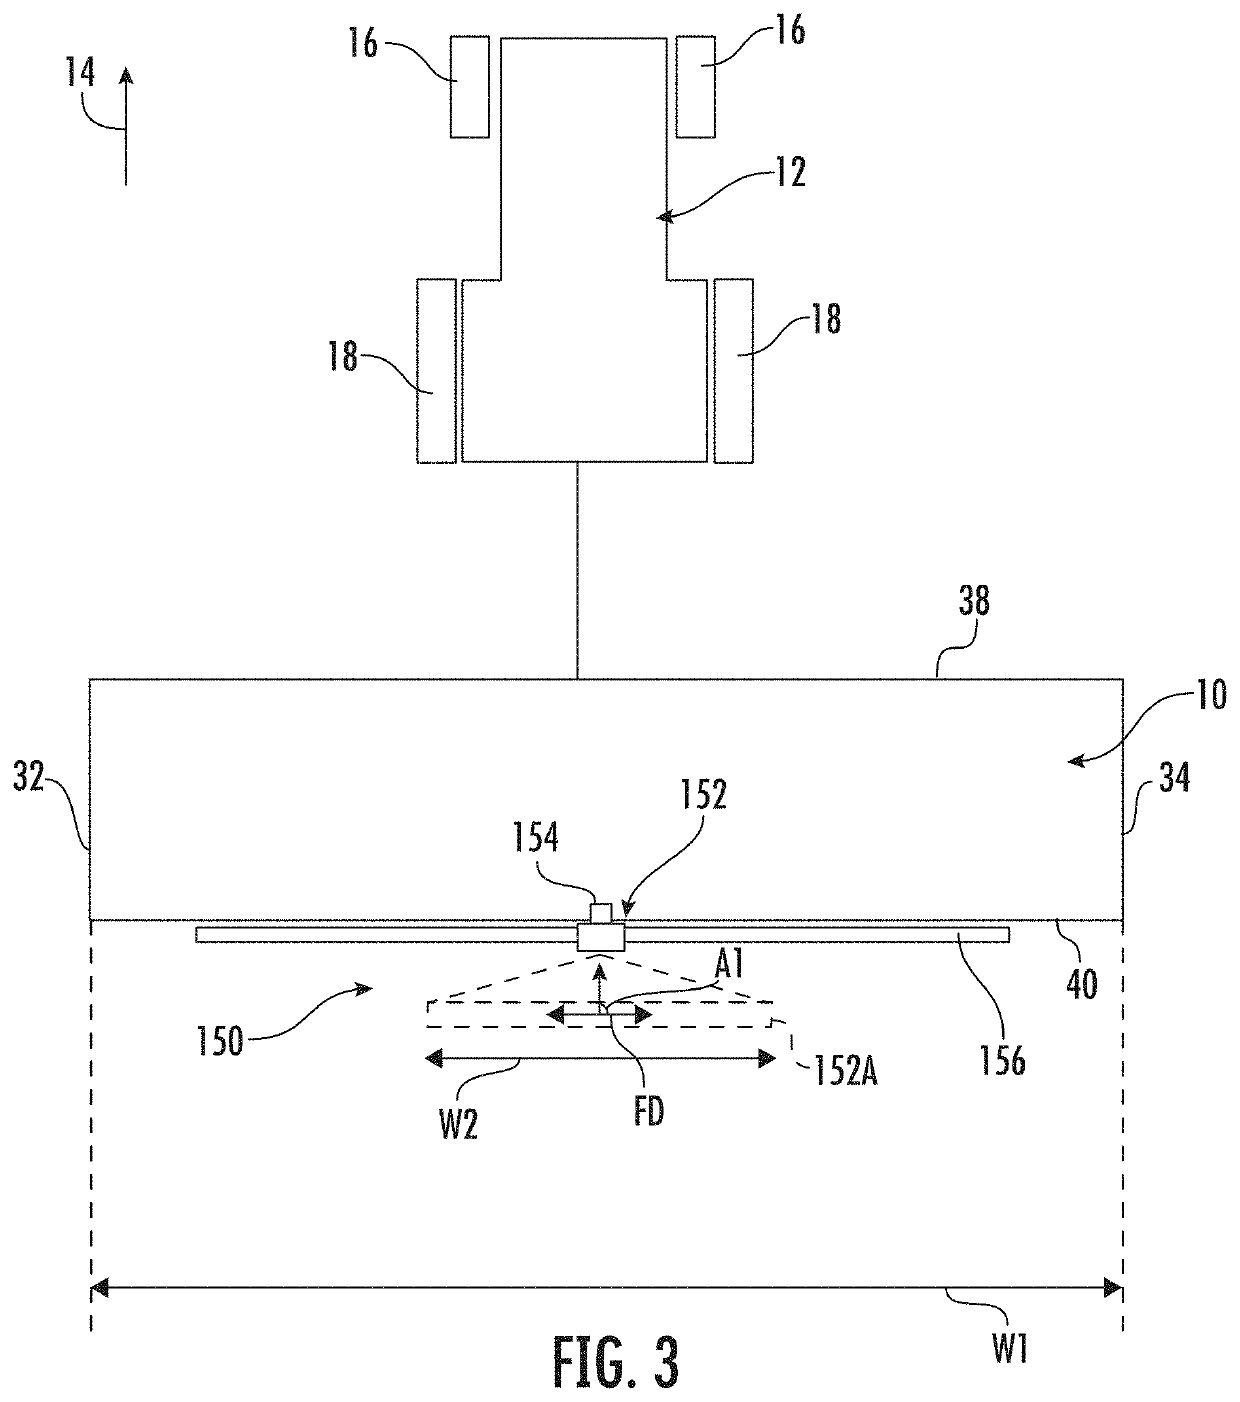 Systems and methods for monitoring tillage conditions